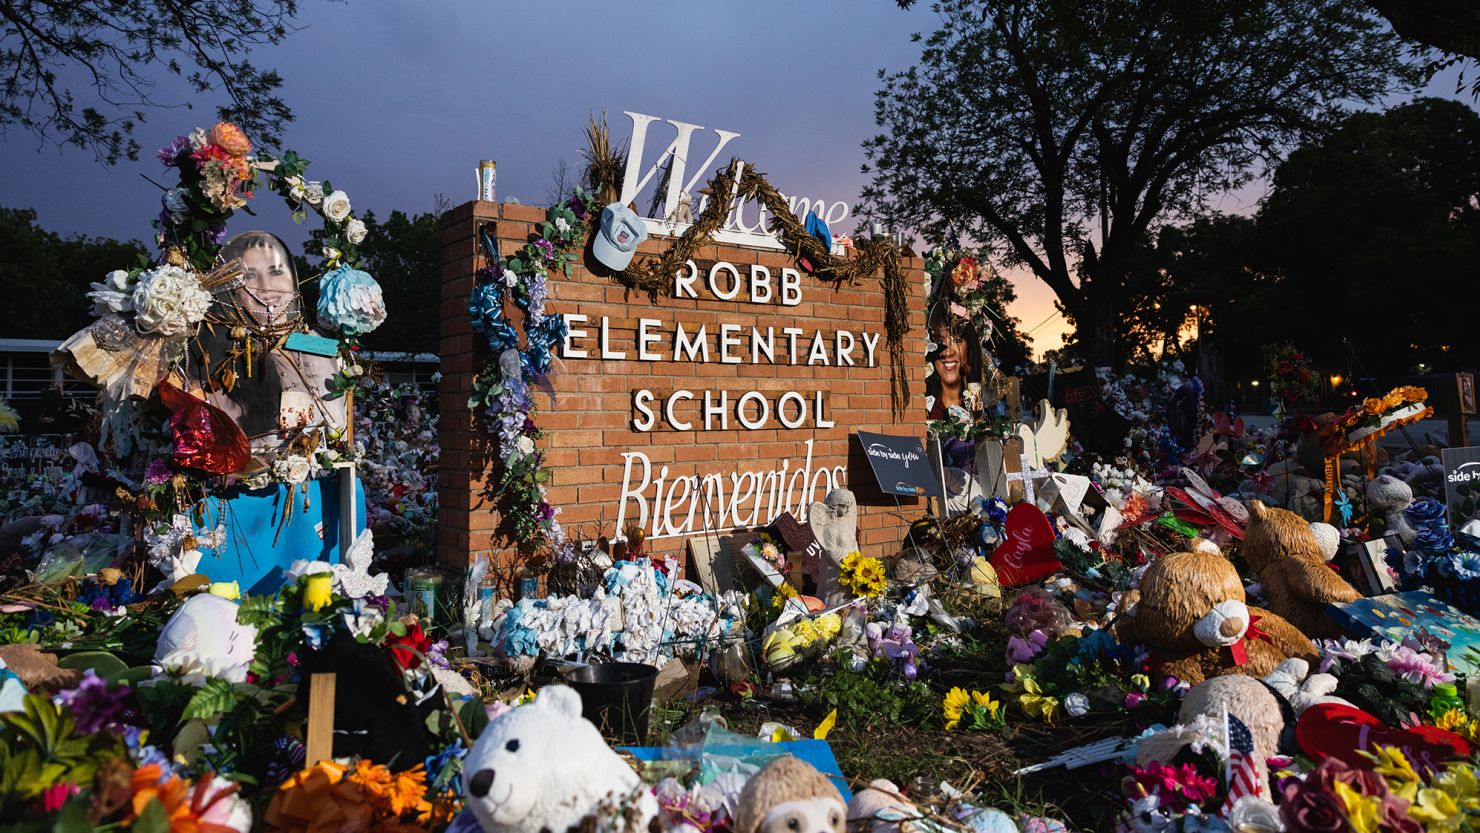 UVALDE, TX - AUGUST 24: The sun sets behind the memorial for the victims of the massacre at Robb Elementary School on August 24, 2022 in Uvalde, Texas. The Consolidated Independent School District Board today fired Police Chief Pete Arredondo over police response during the May 24 massacre, America's deadliest school shooting since 2012.  (Photo by Jordan Vonderhaar/Getty Images)